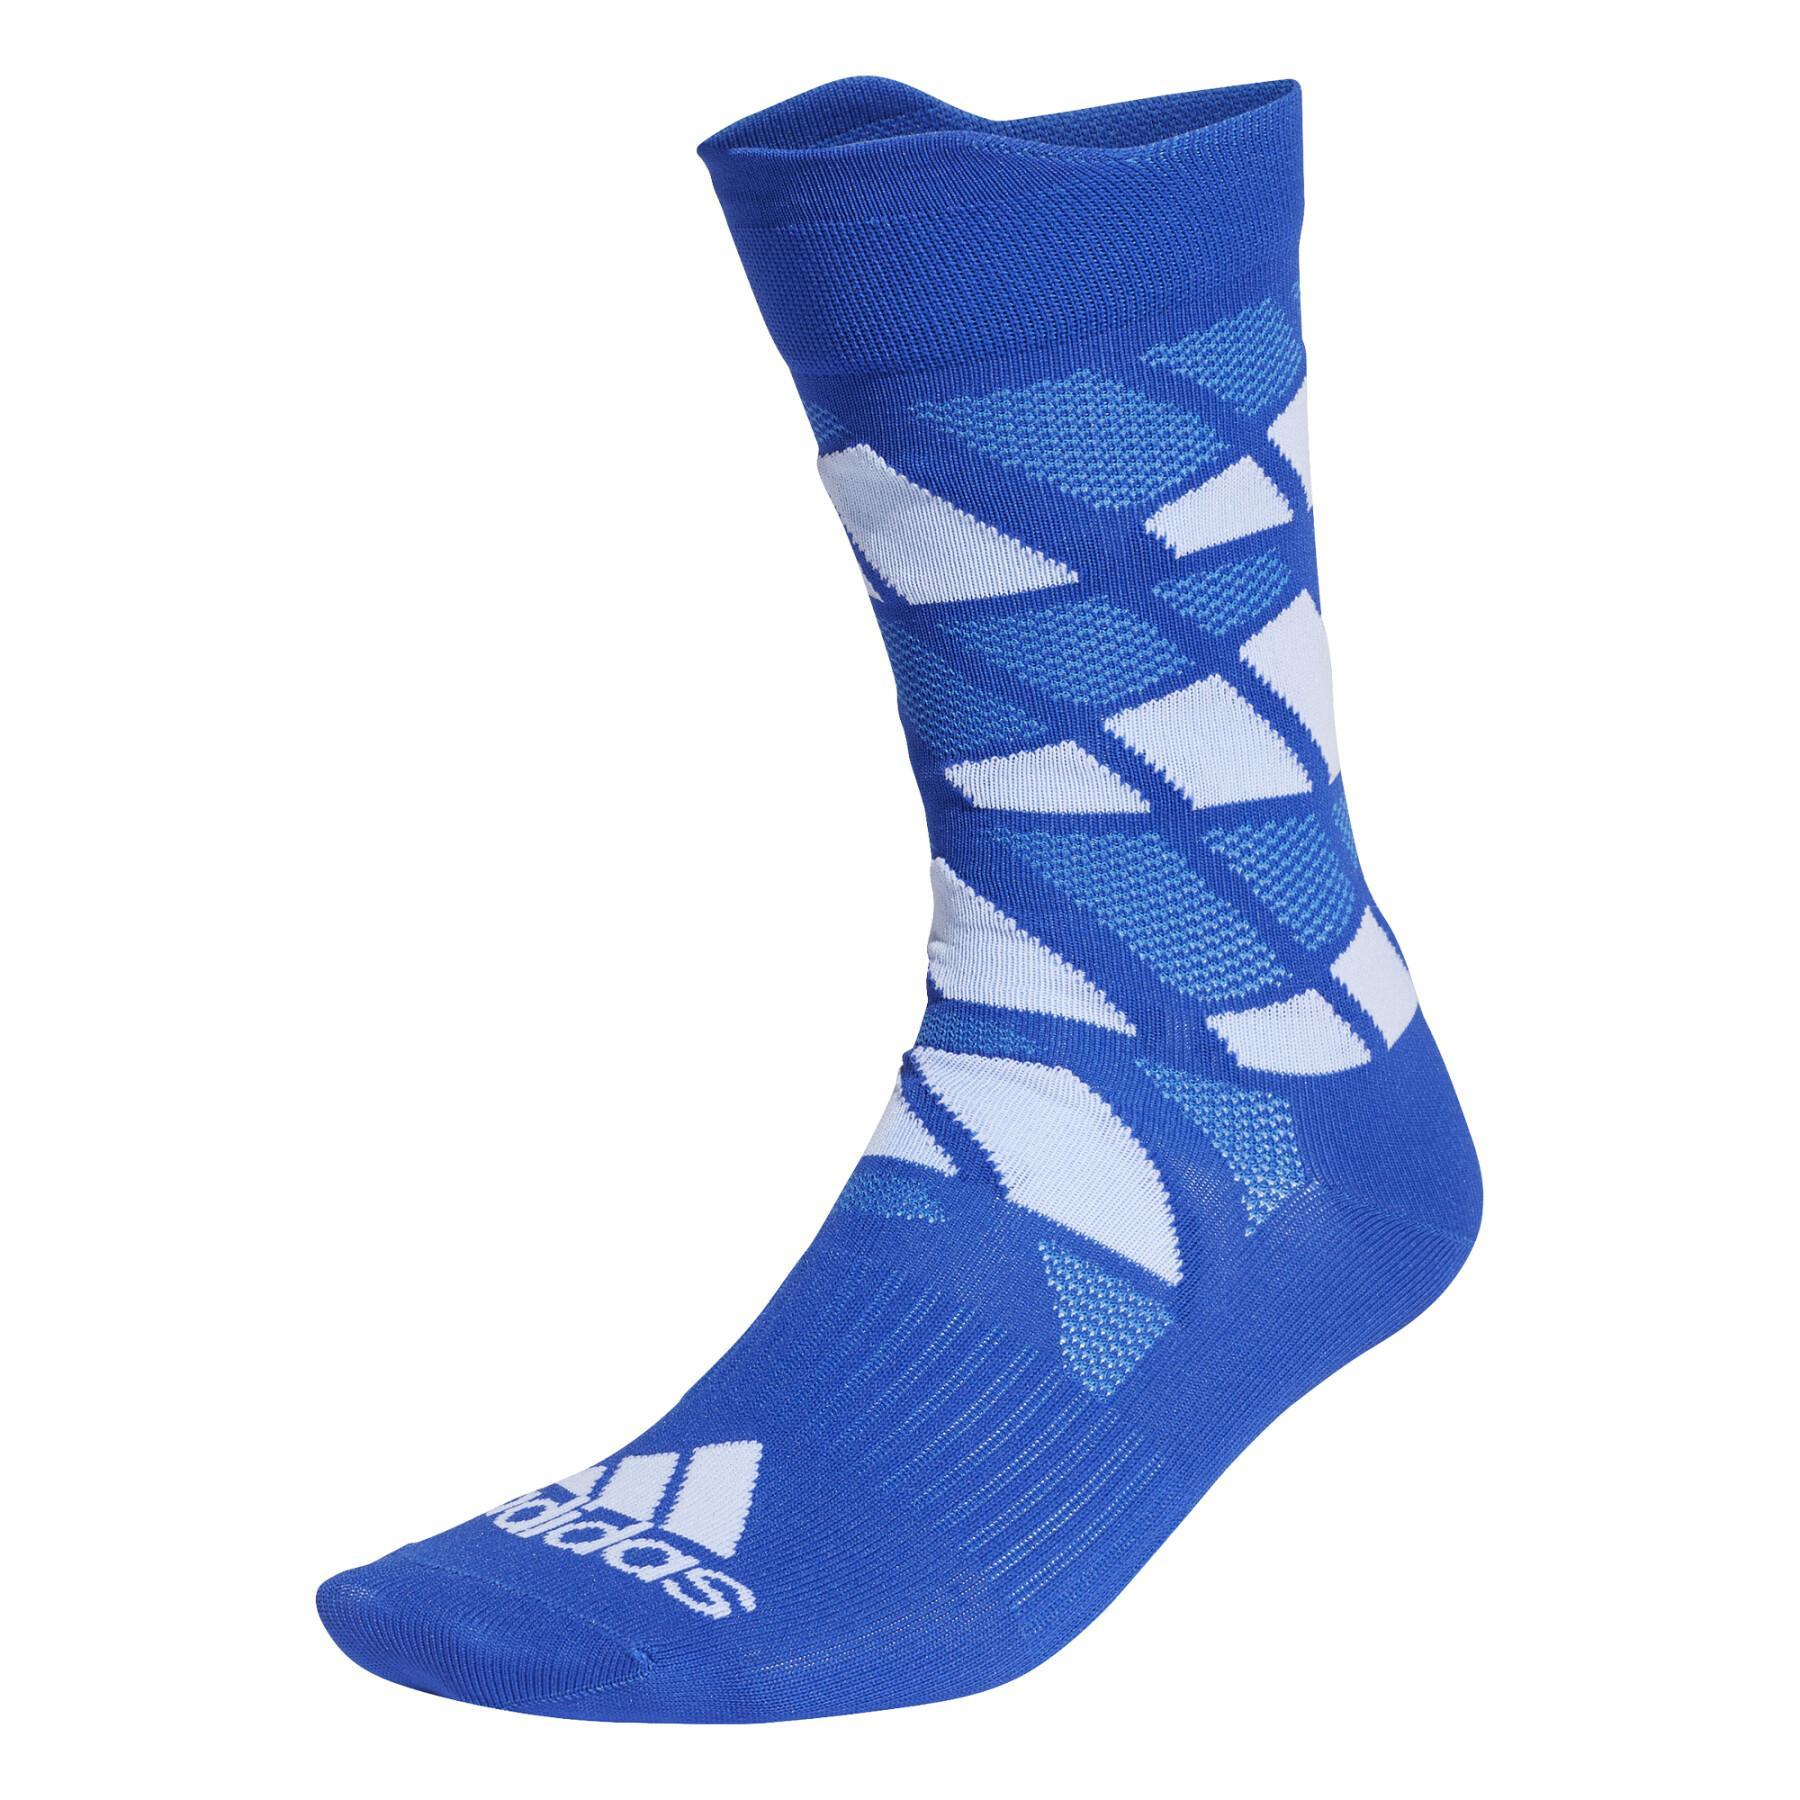 Calcetines adidas Ultralight Allover Graphic performance